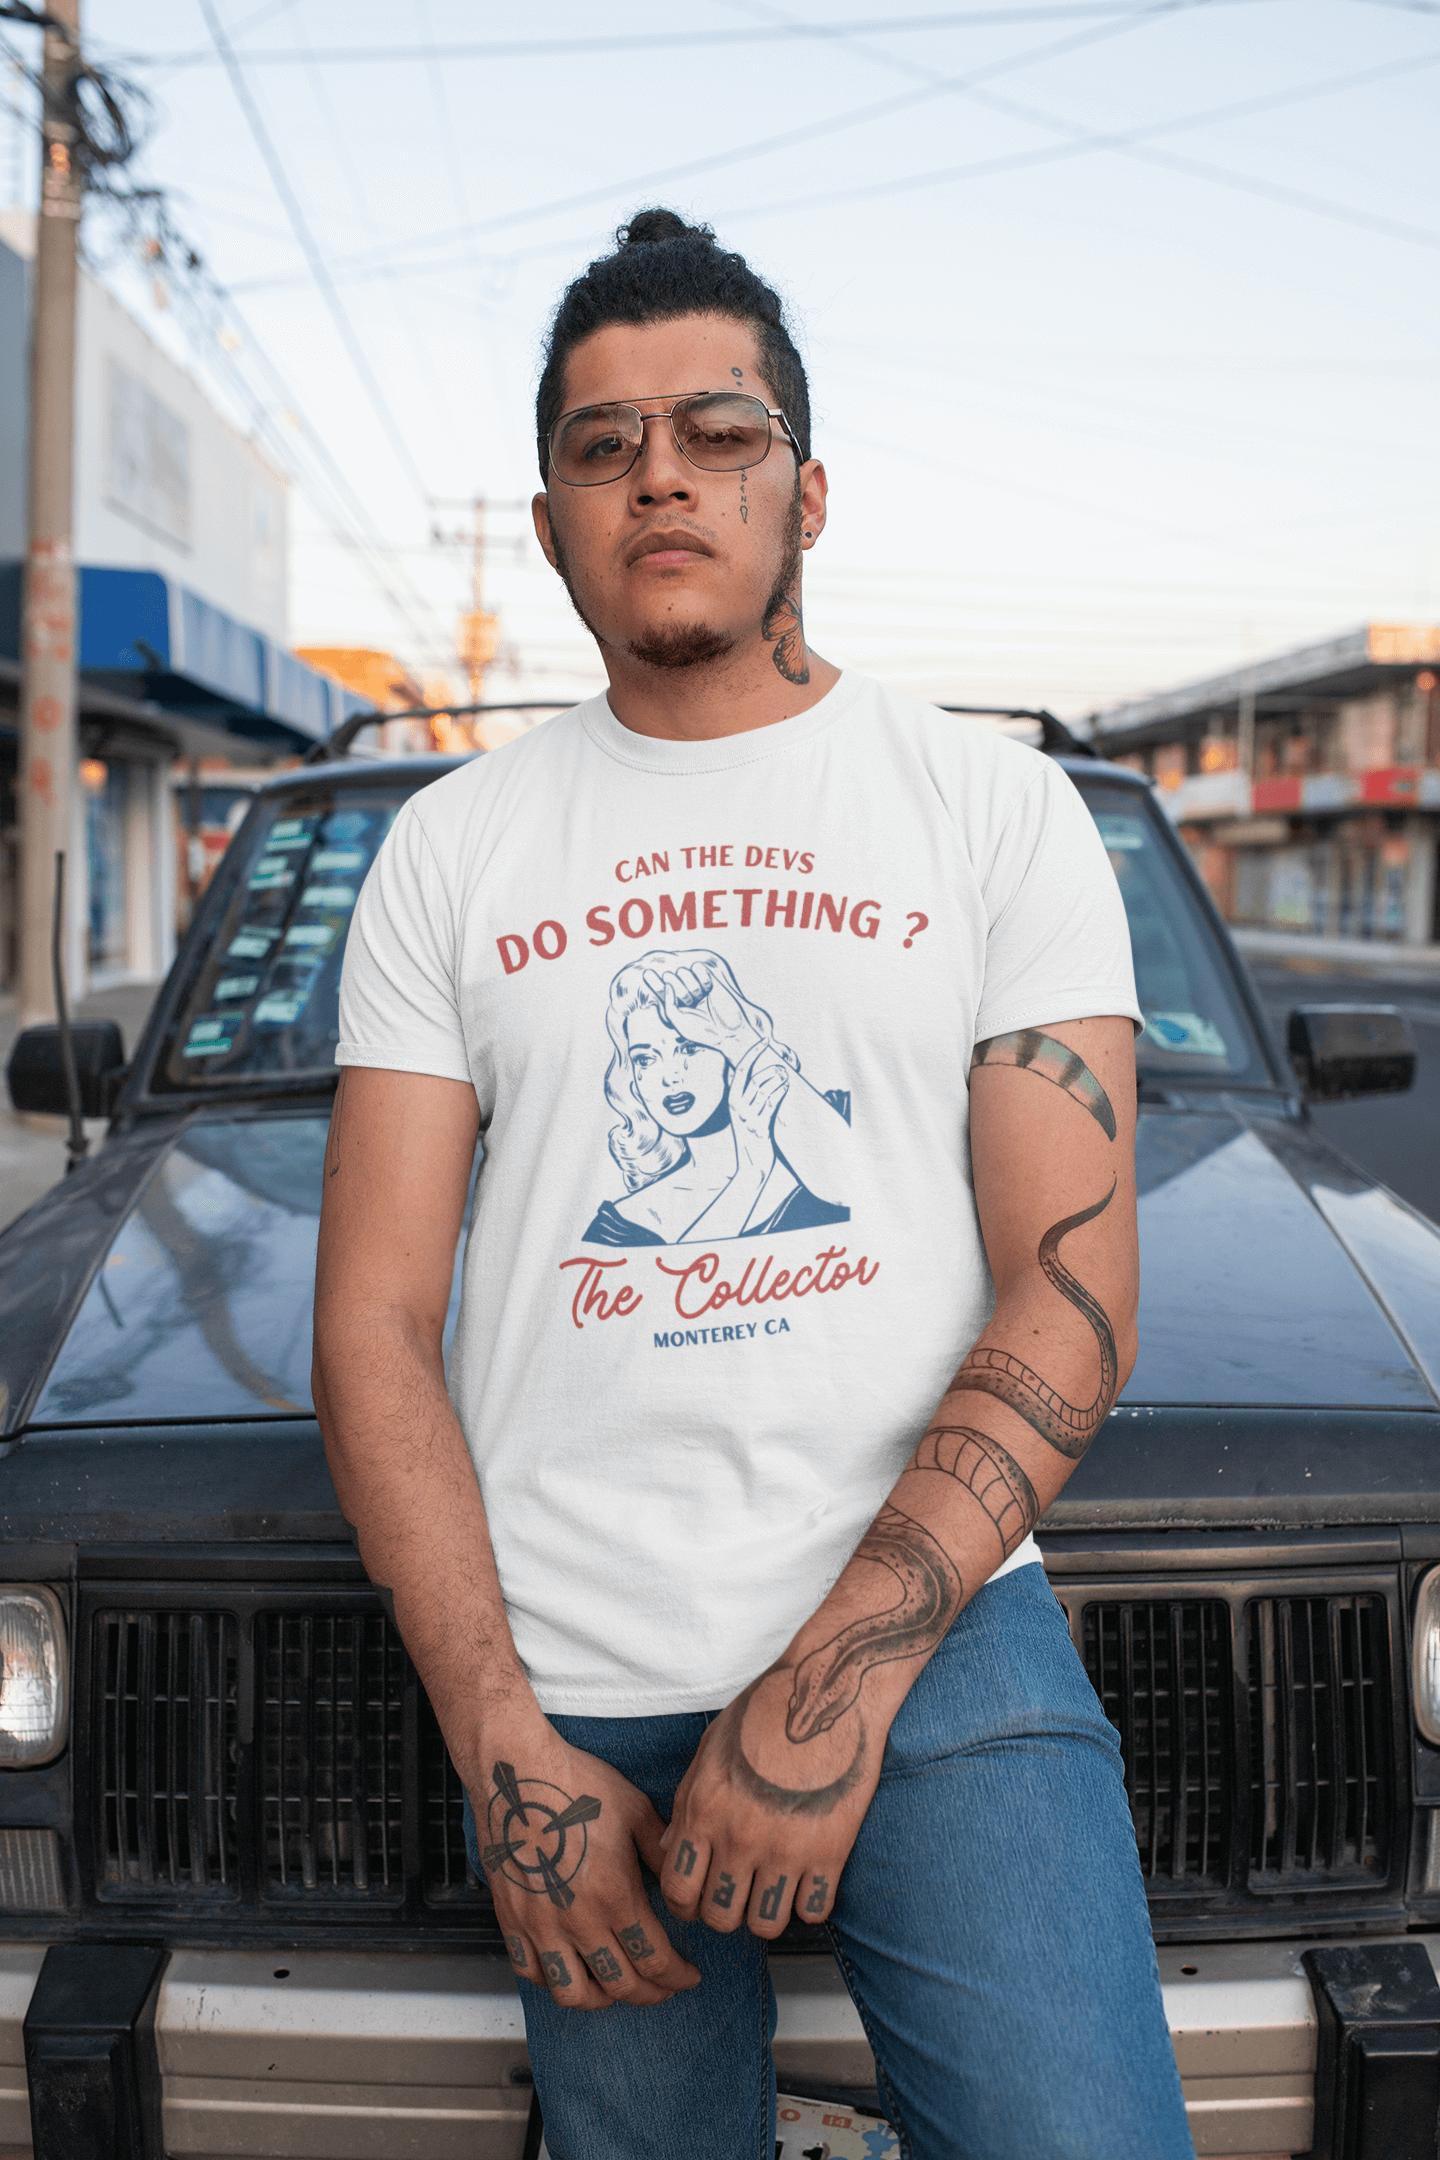 Tattooed man leaning on car wearing "Can the devs do something?" NFT T-shirt